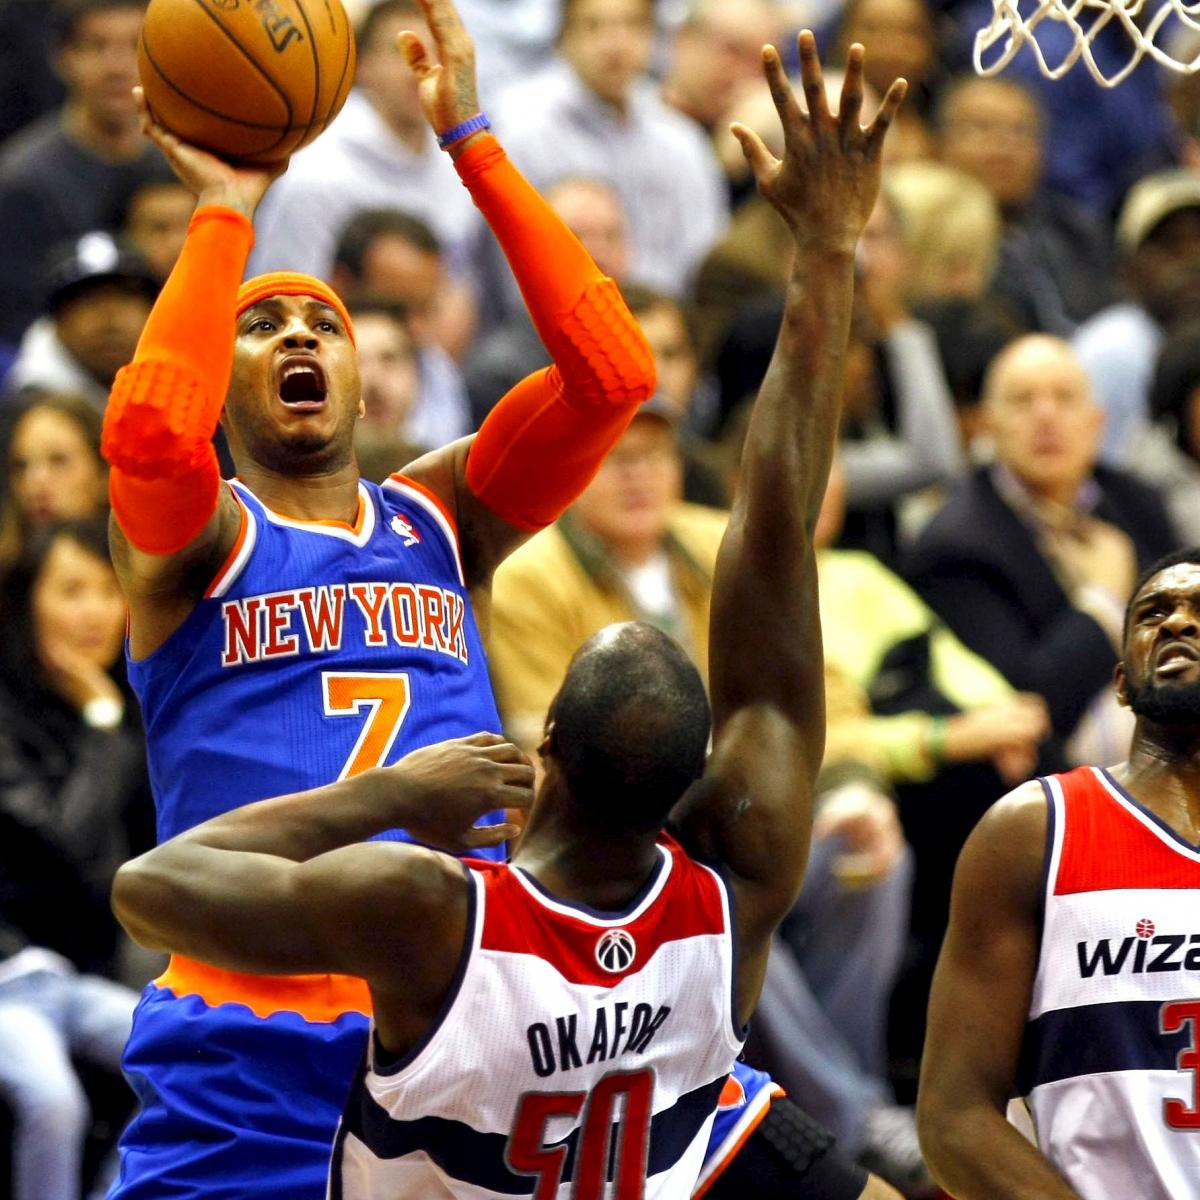 New York Knicks vs. Washington Wizards Live Score, Results and Game